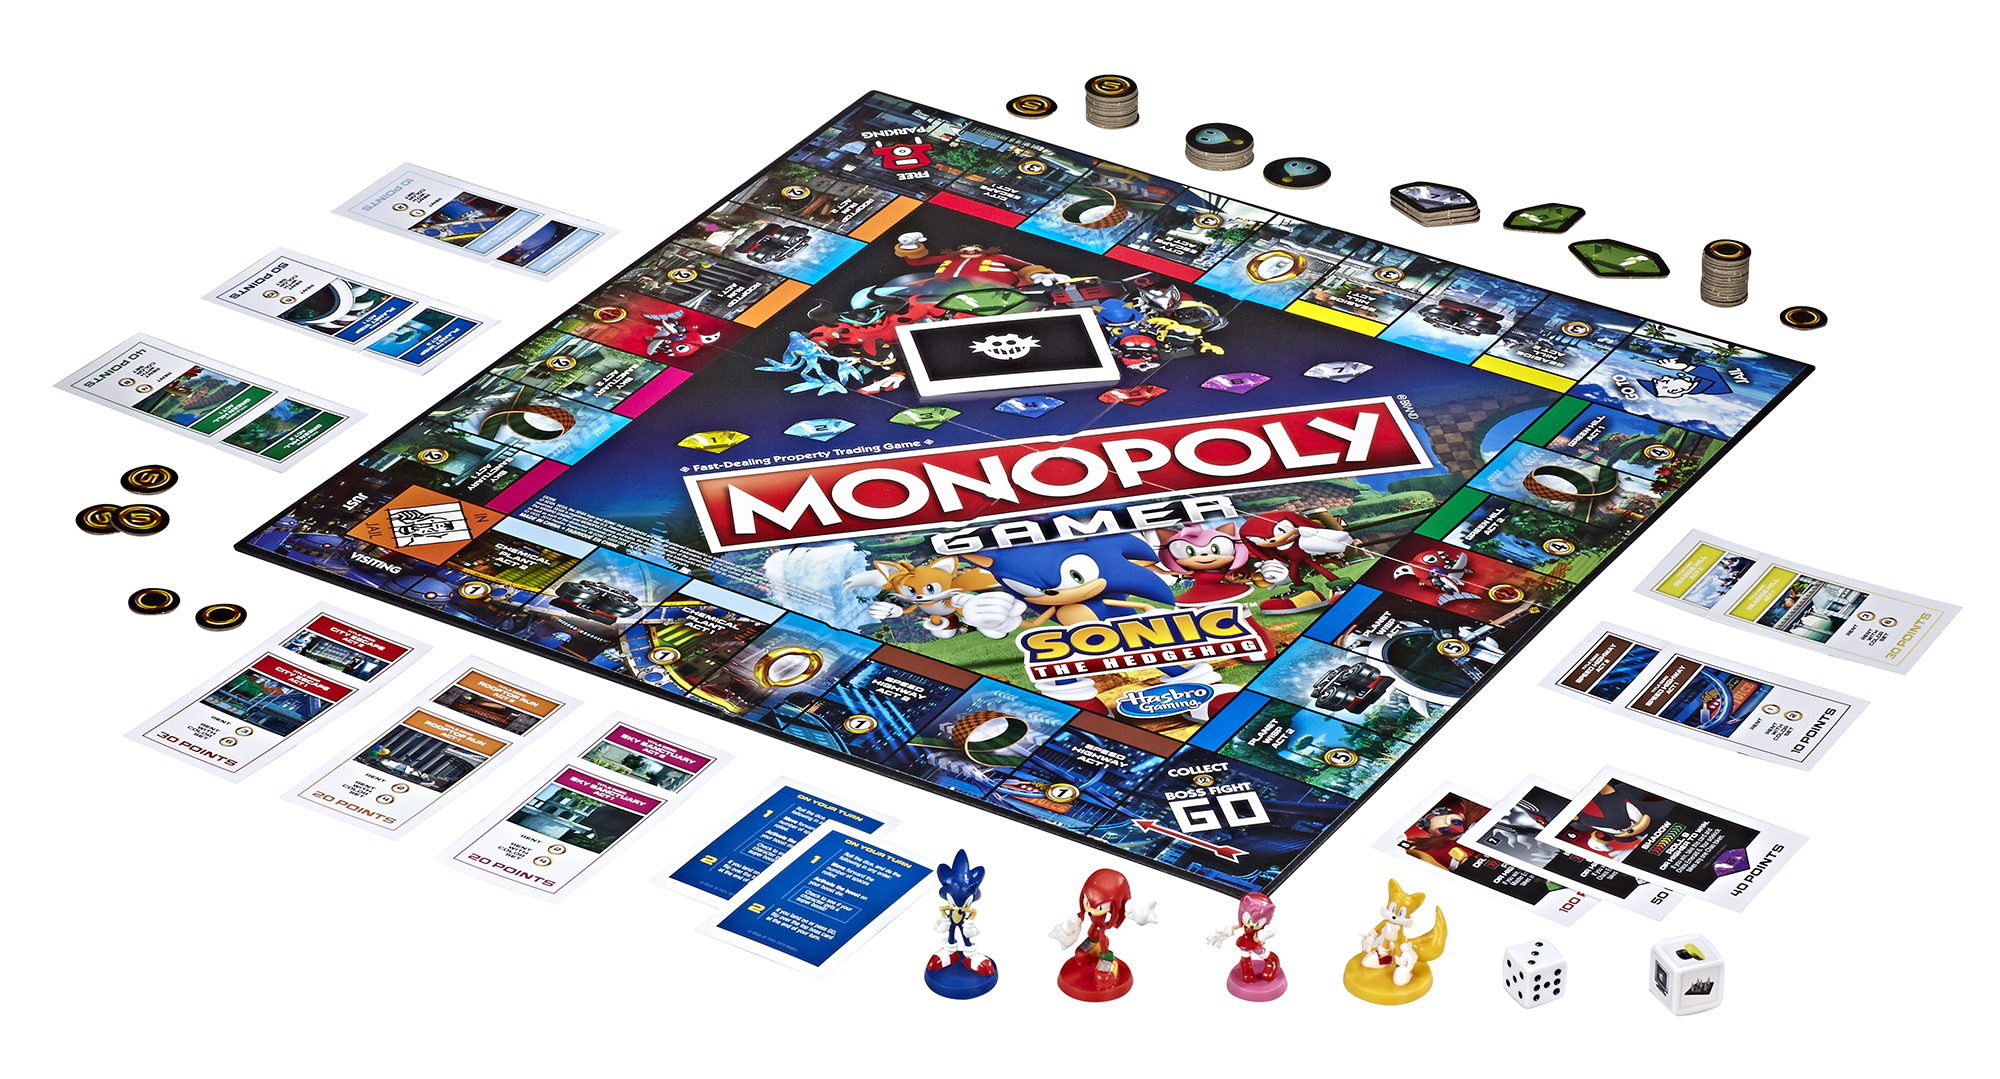 Sonic the Hedgehog Monopoly unveiled